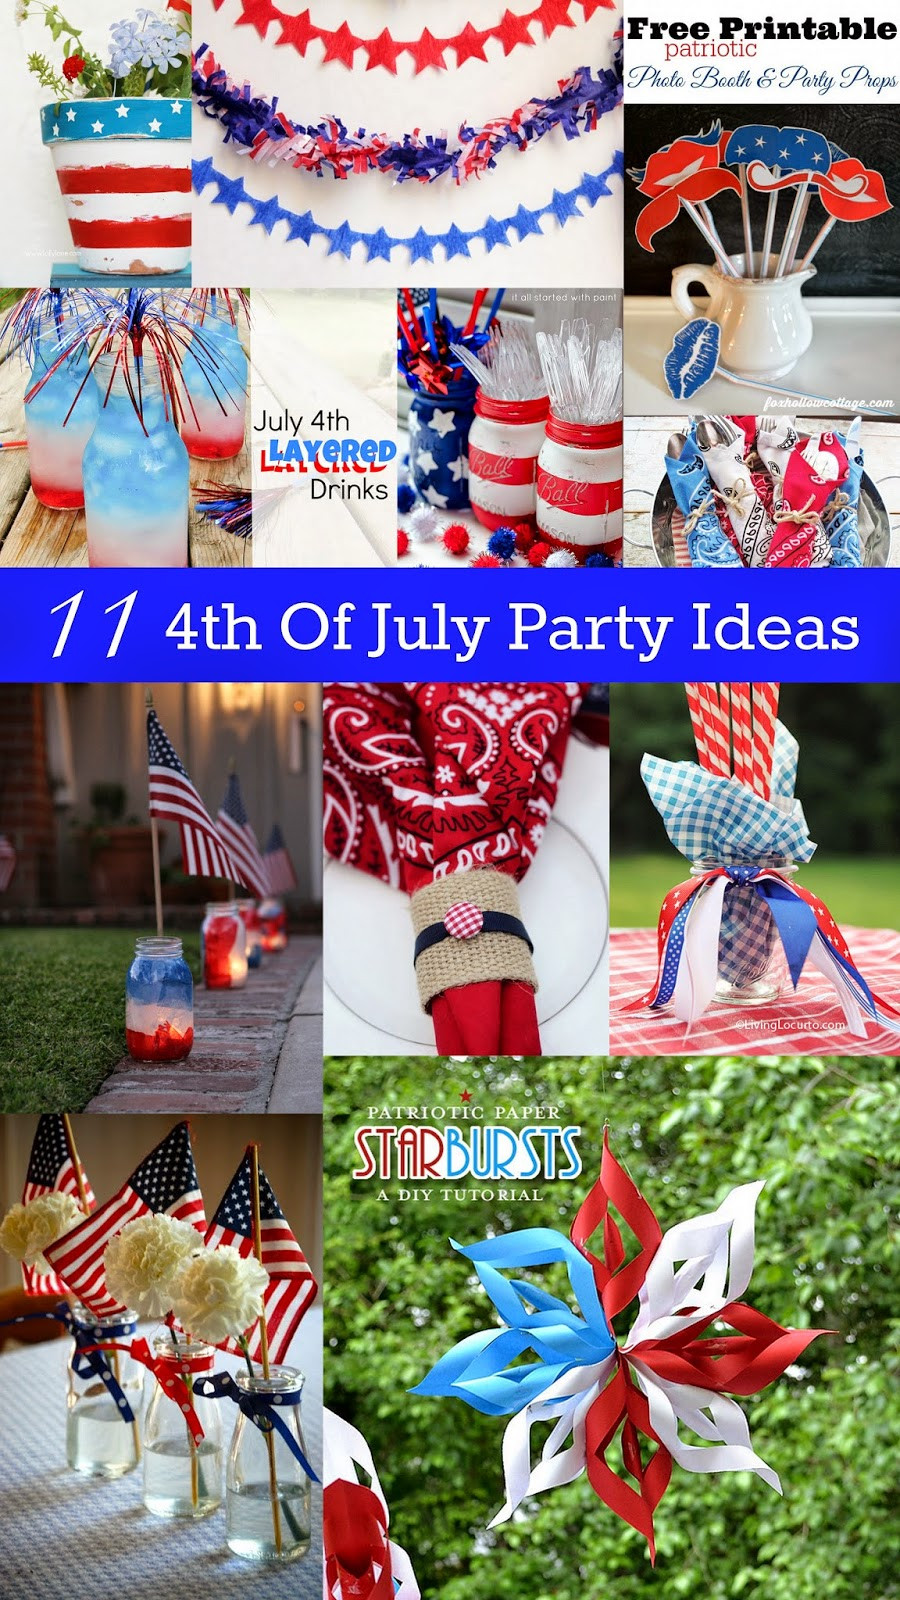 4th Of July Party Supplies
 Housewife Eclectic 11 4th of July Party Ideas